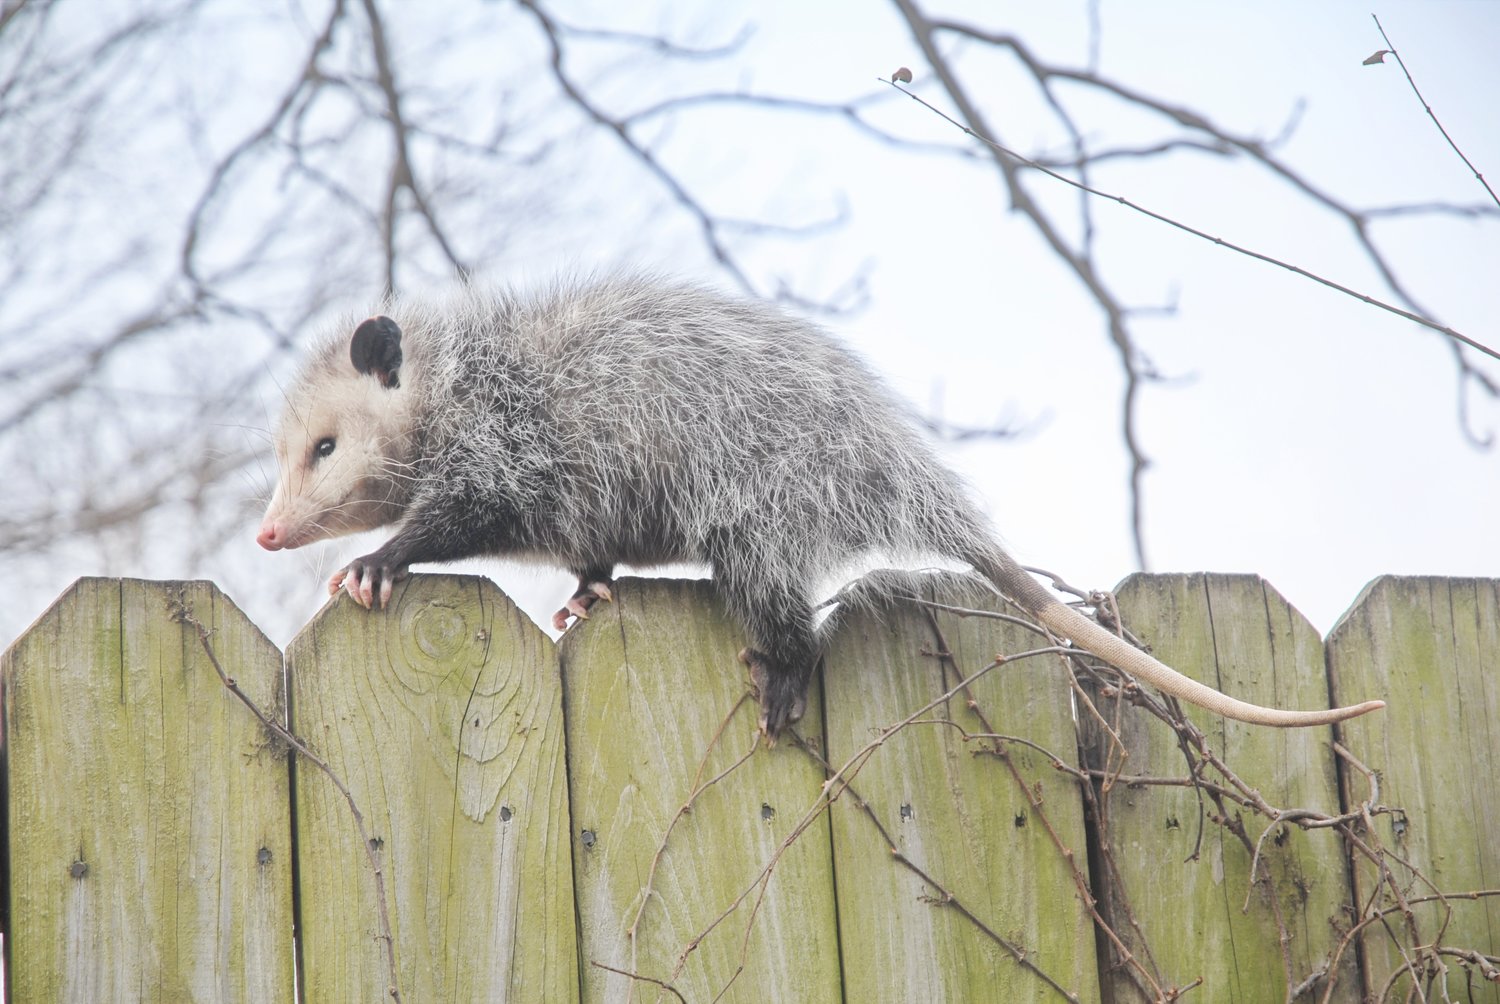 One opossum can eat about 5,000 ticks each year, so we like having them around. Yeah, those teeth are scary—but trust me, they’re really adorable. IMHO.